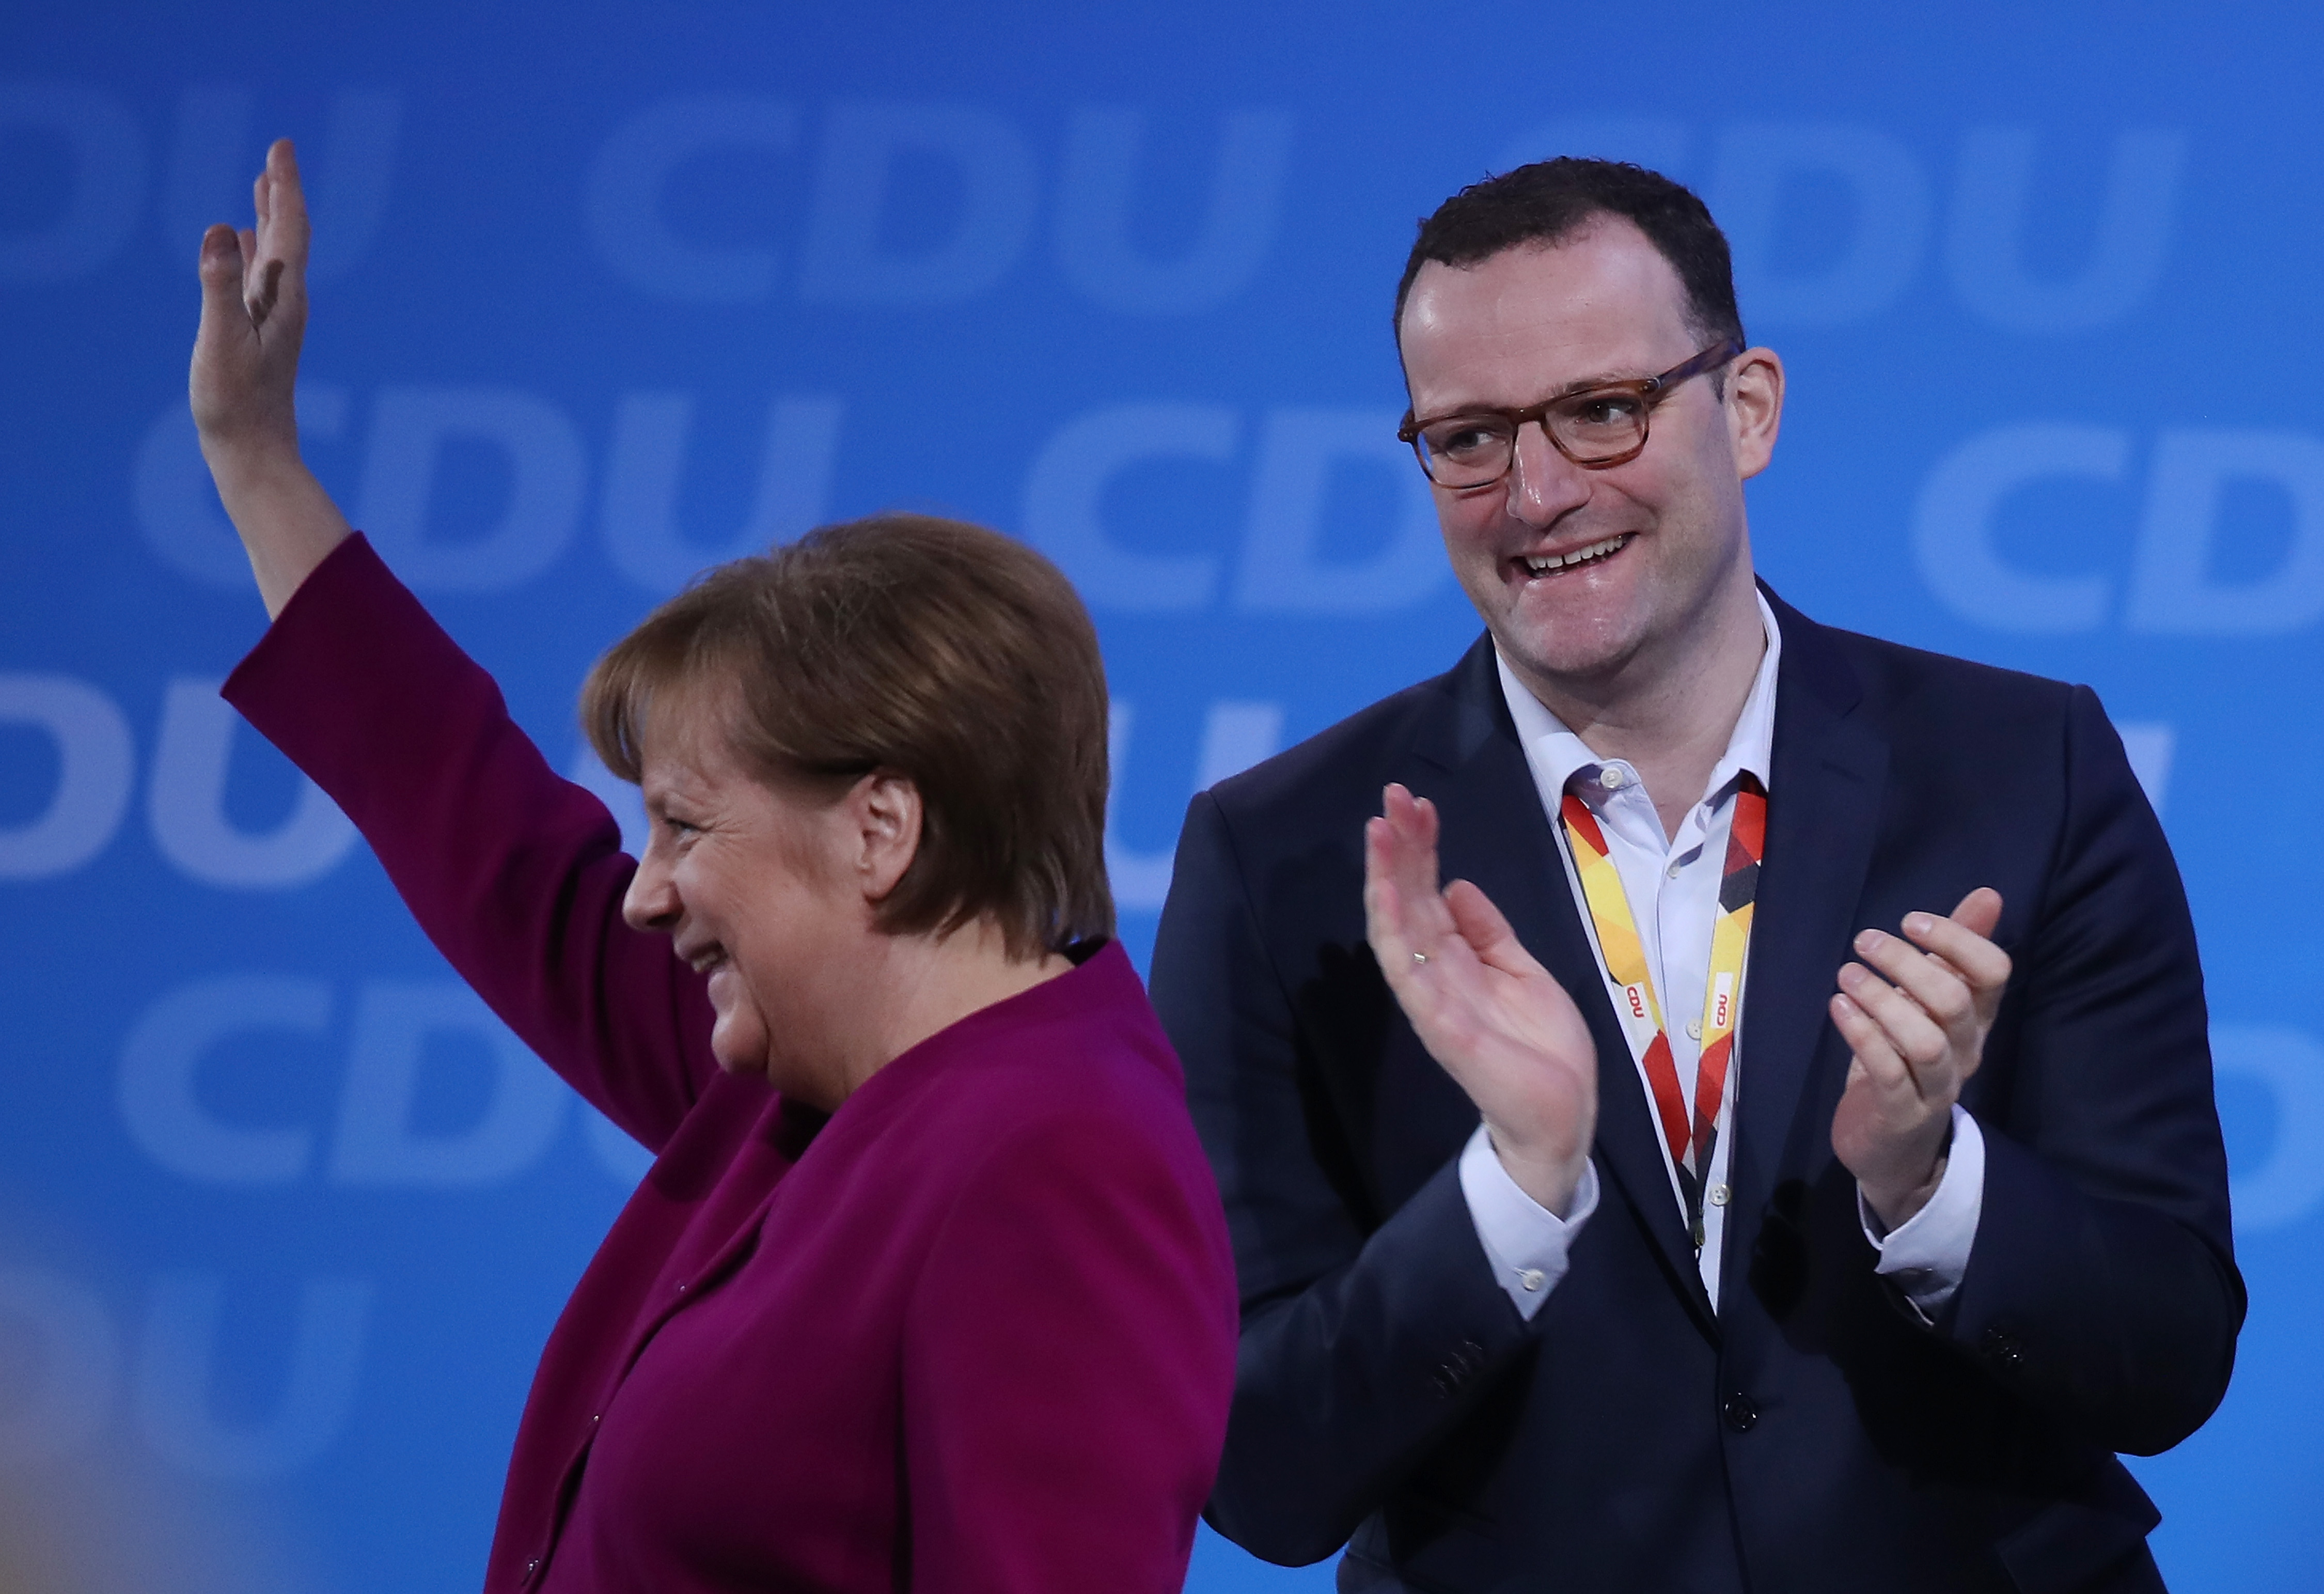 Chancellor of Germany Angela Merkel with health minister Jens Spahn